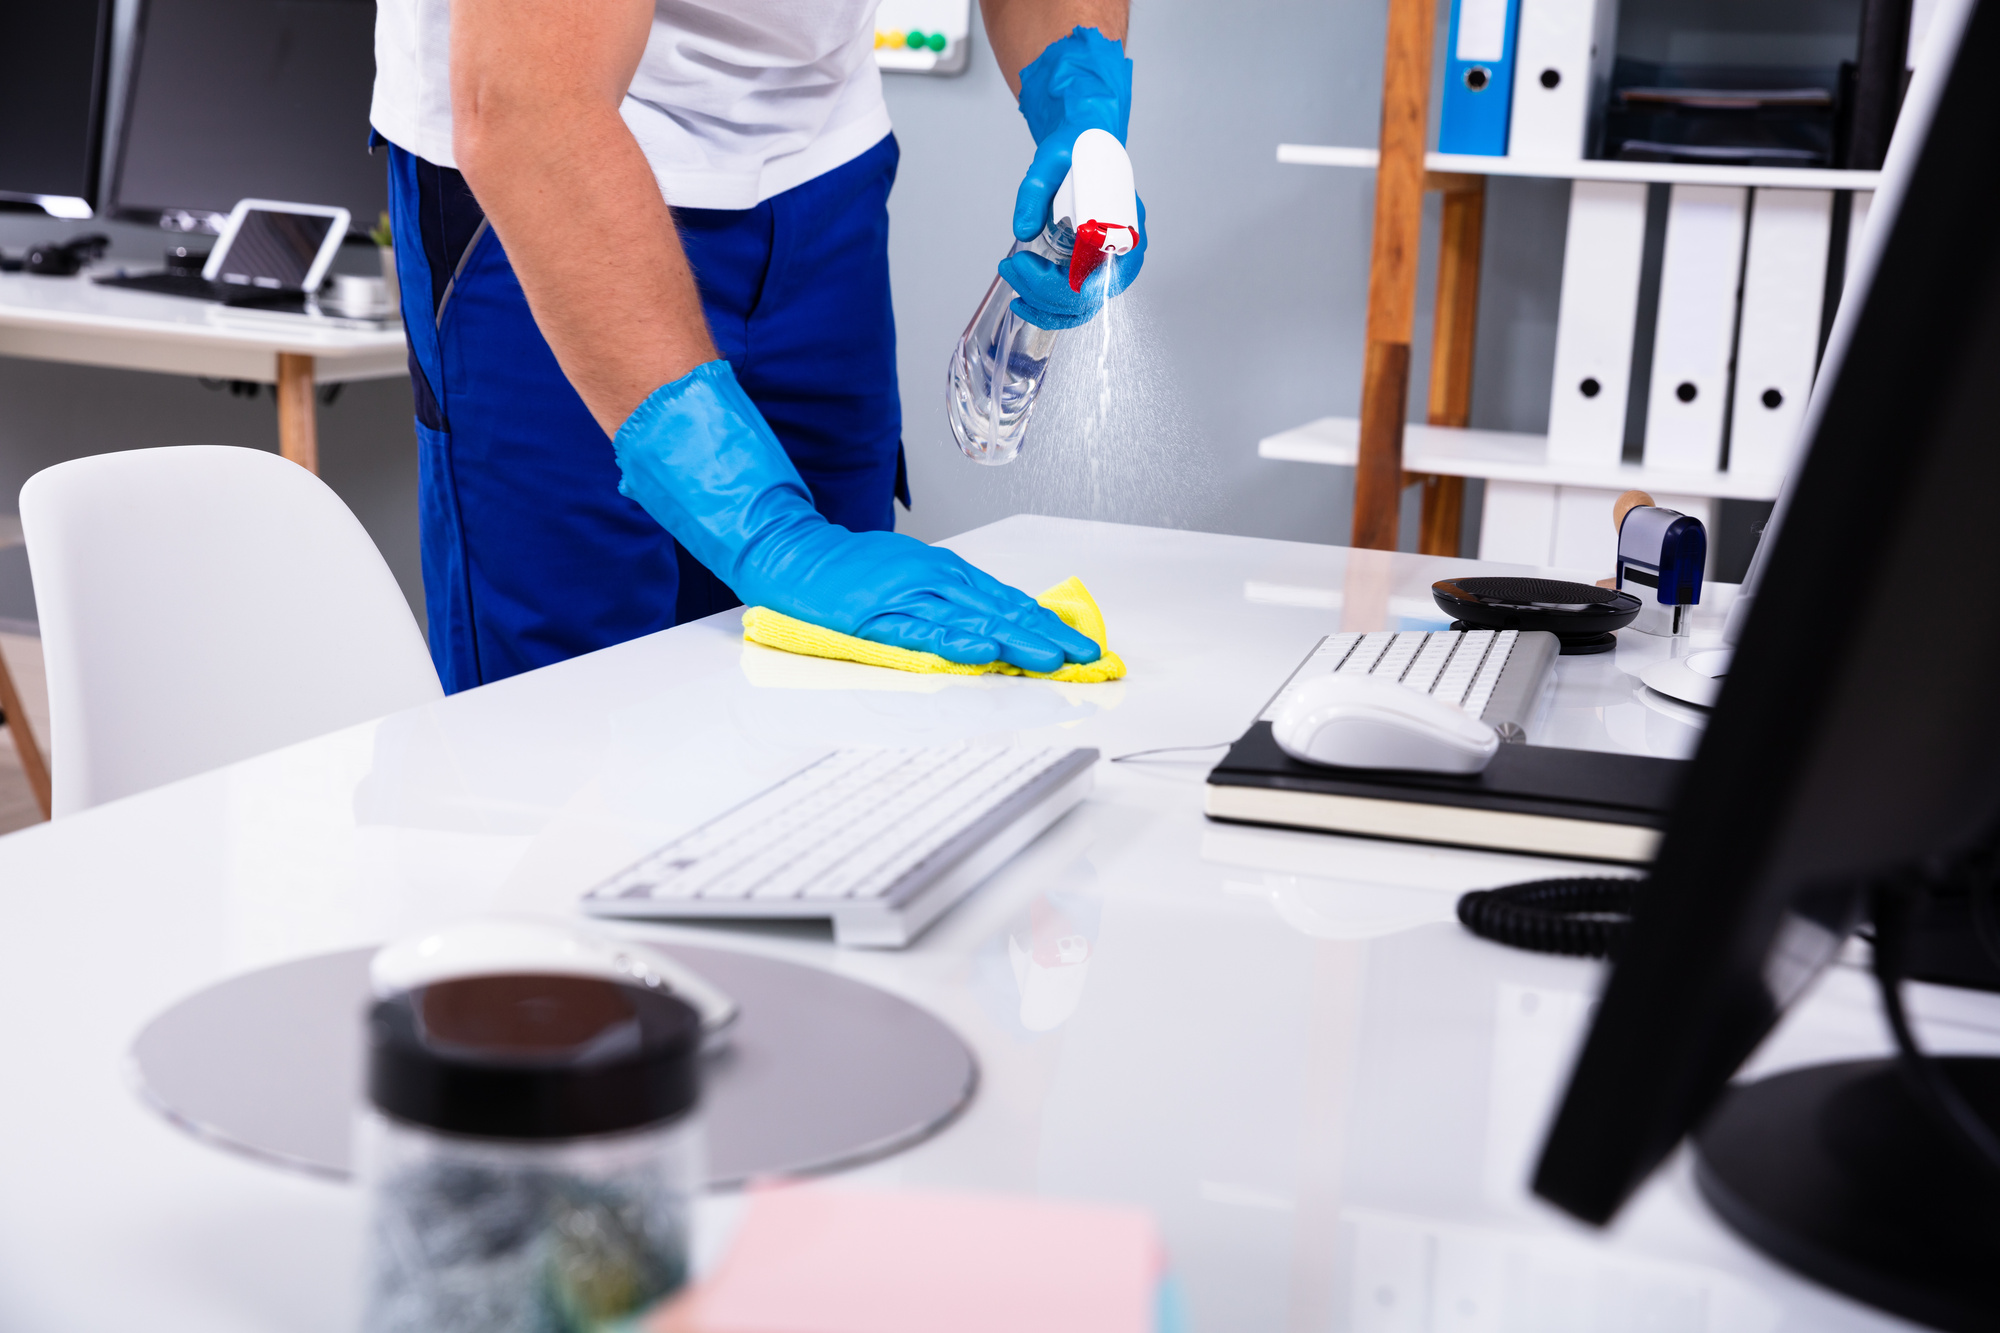 office cleaning services arlington heights including cleaning of all surfaces and electrical appliances